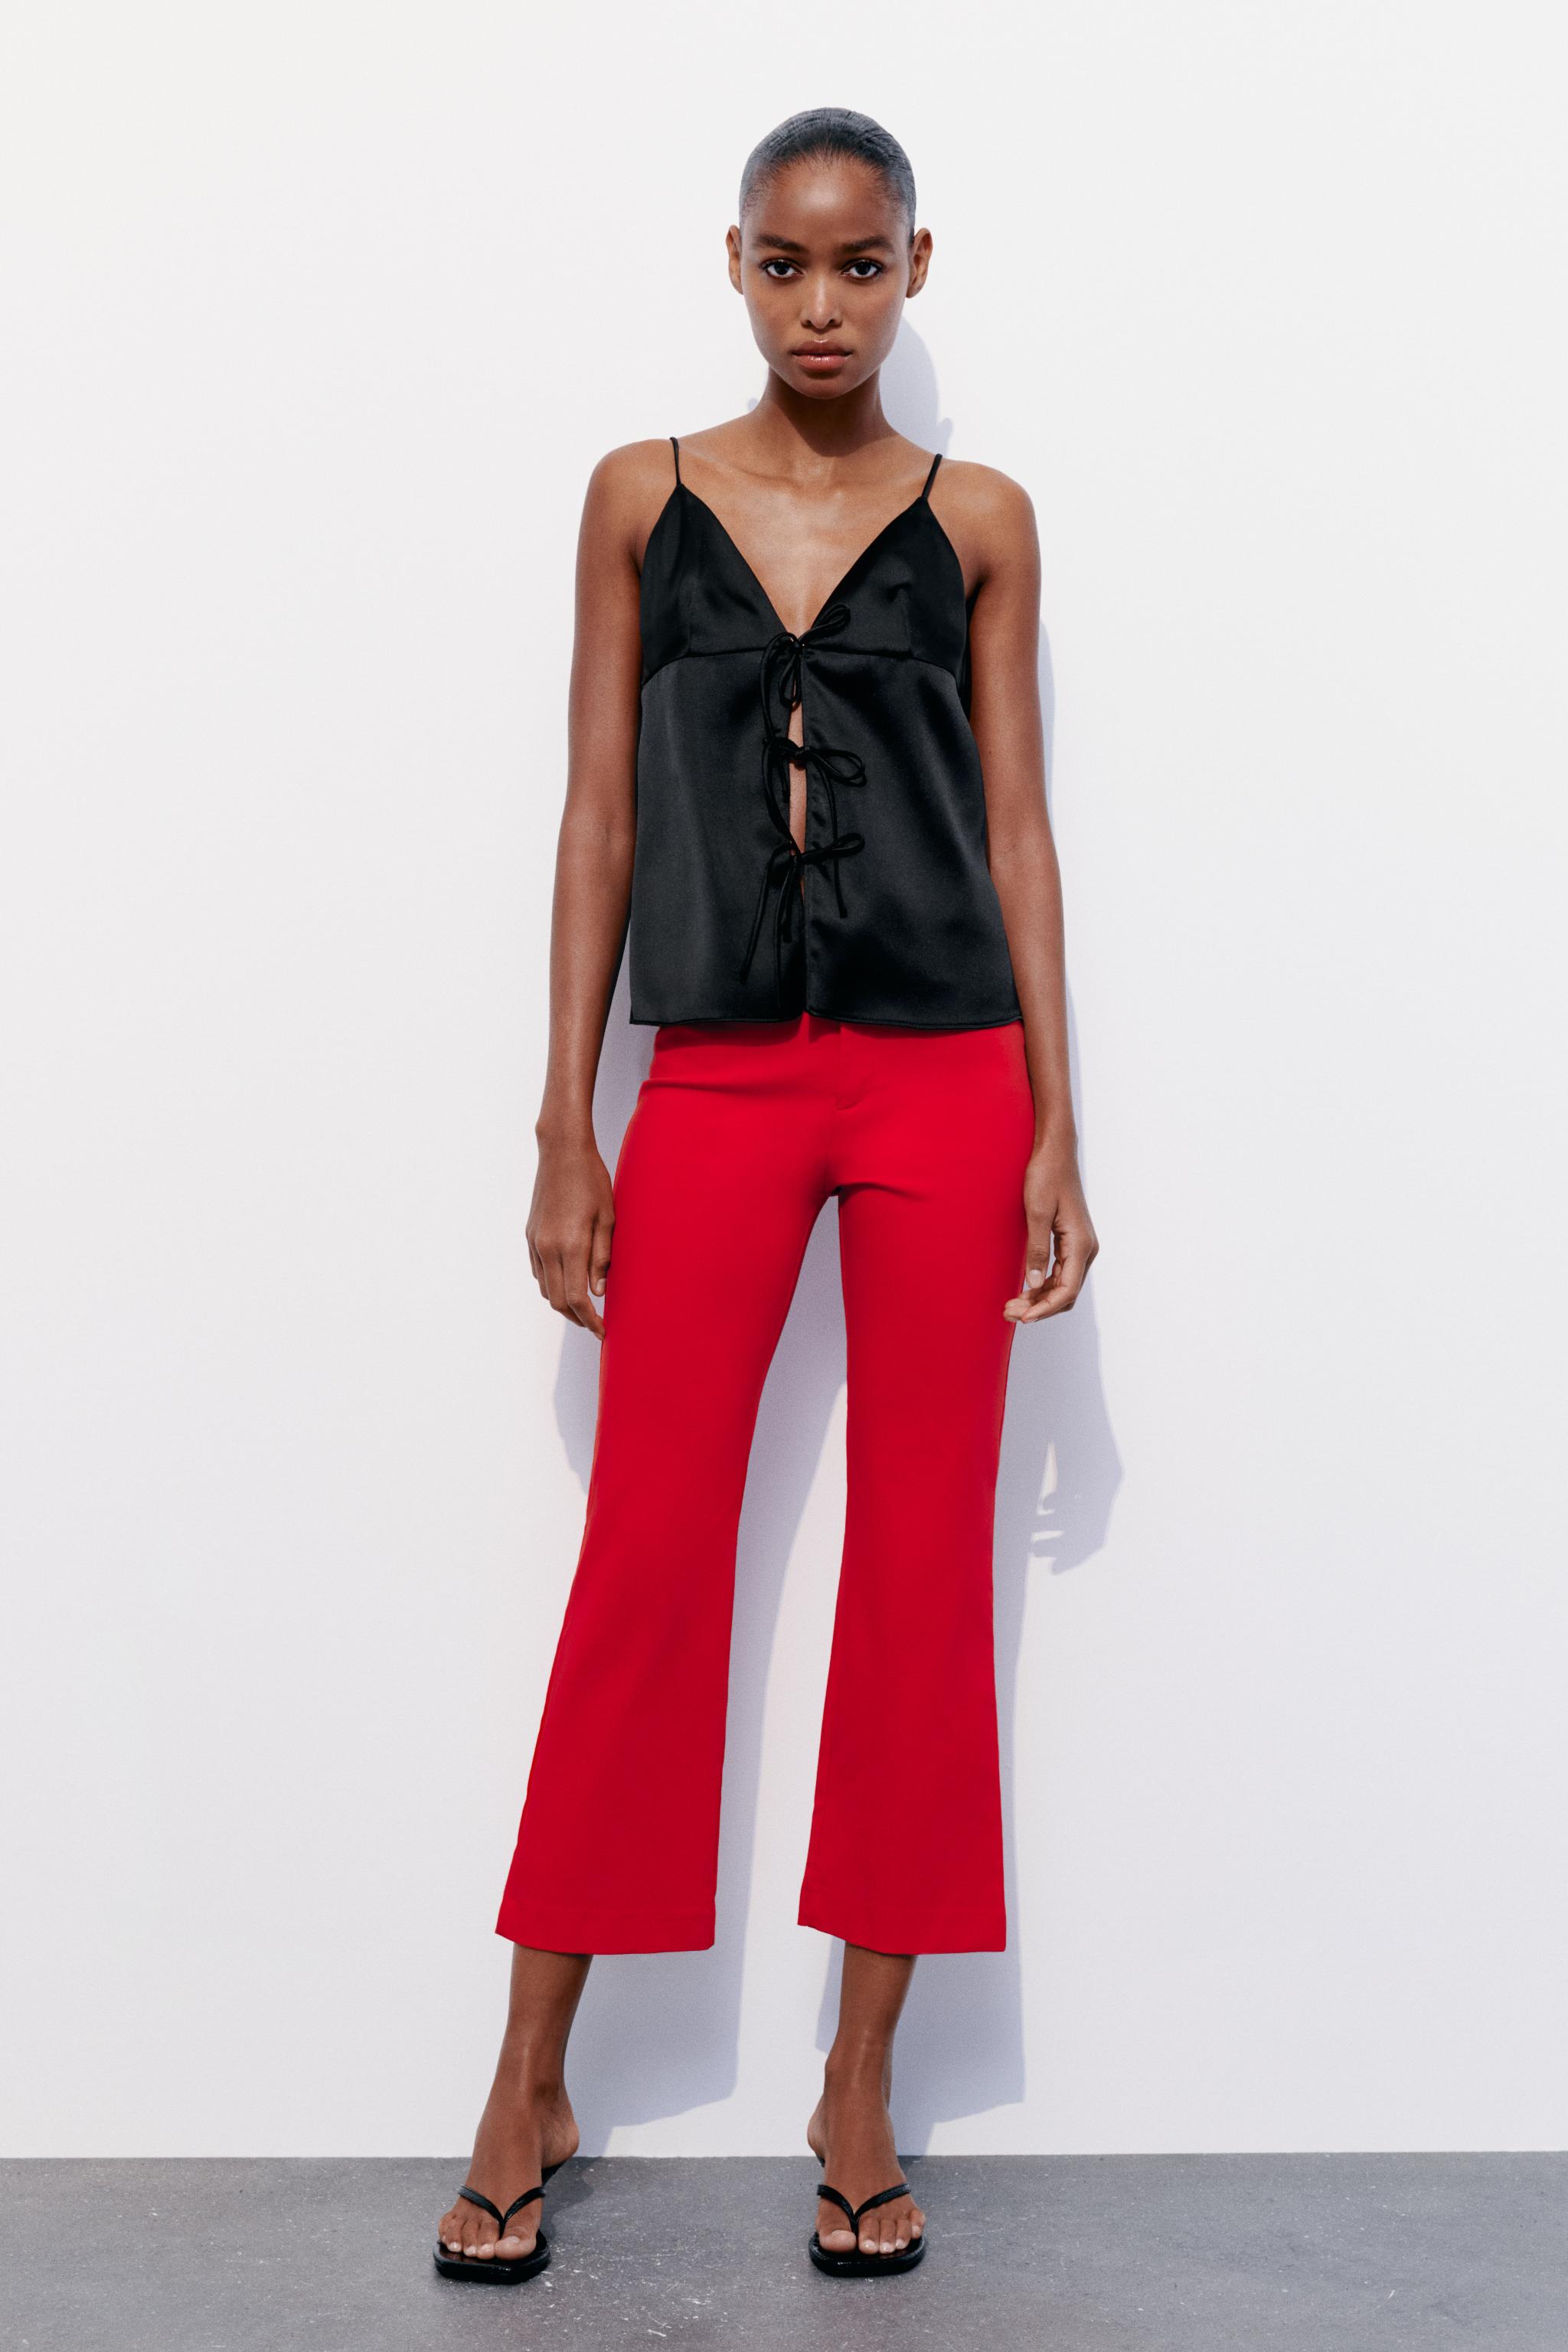 Buy Red Pants for Women by AABTA Online